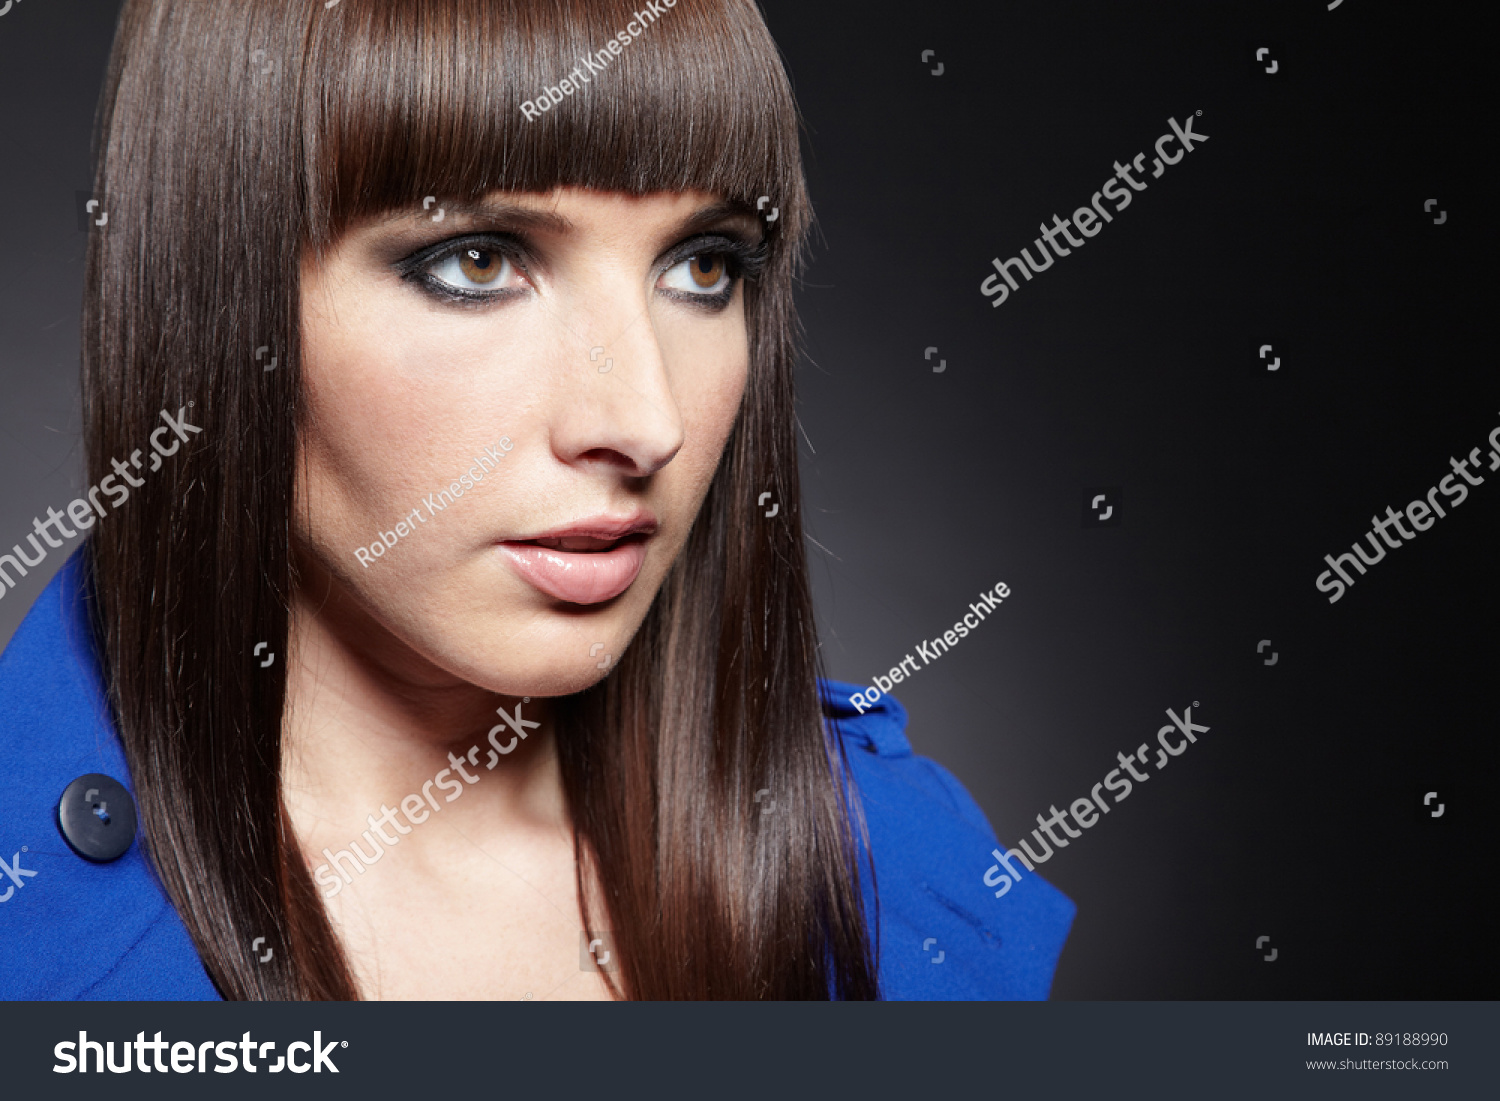 Pageboy Haircut Images Stock Photos Amp Vectors Shutterstock